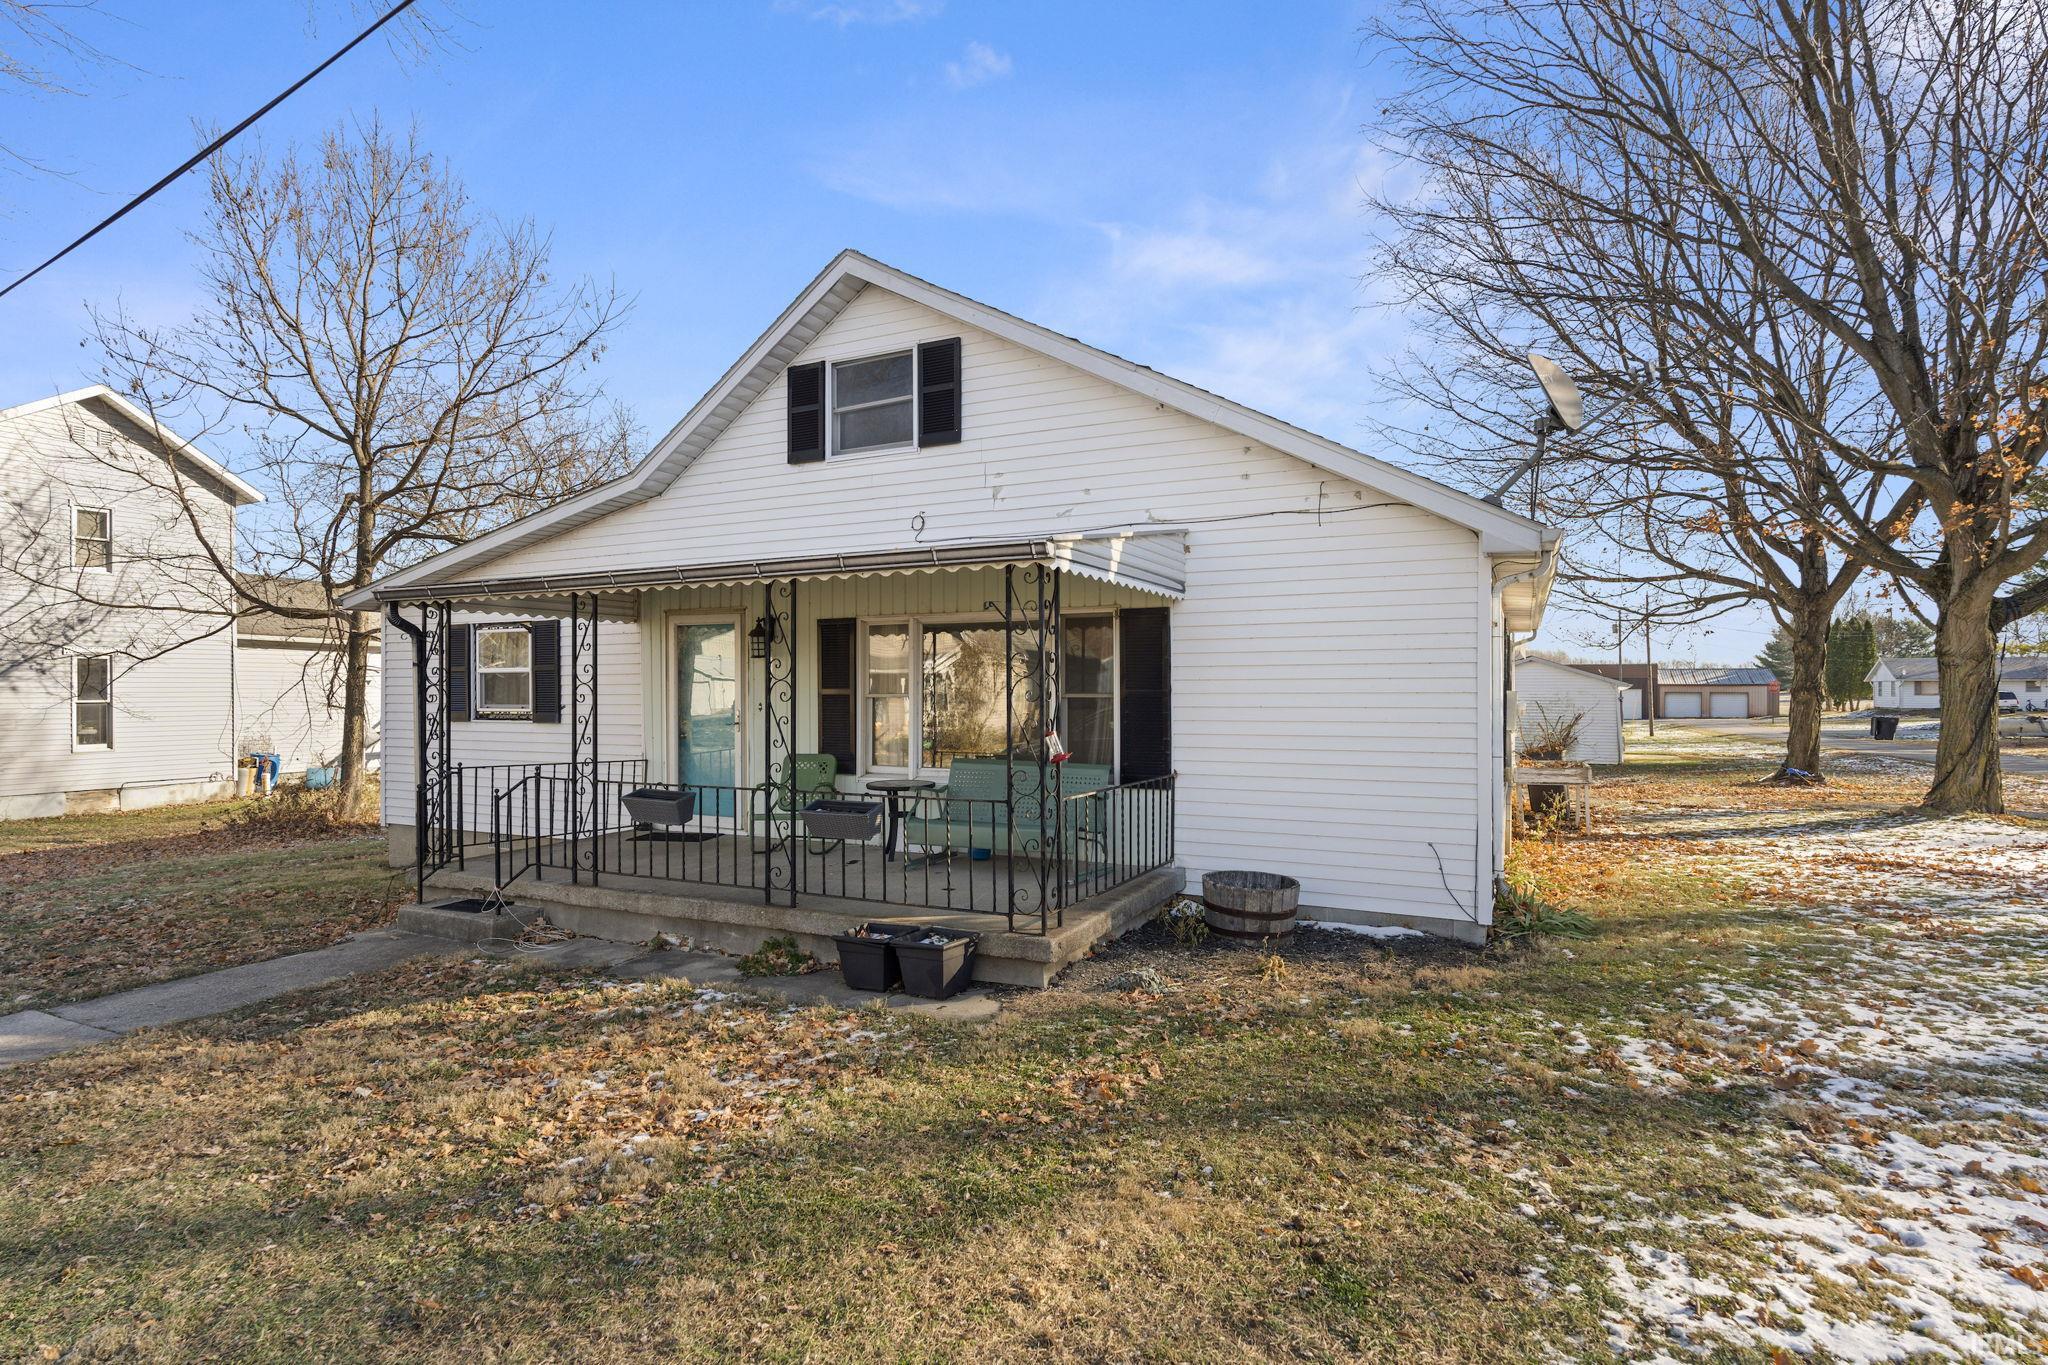 5907 S 594 West, Huntington, IN 46750